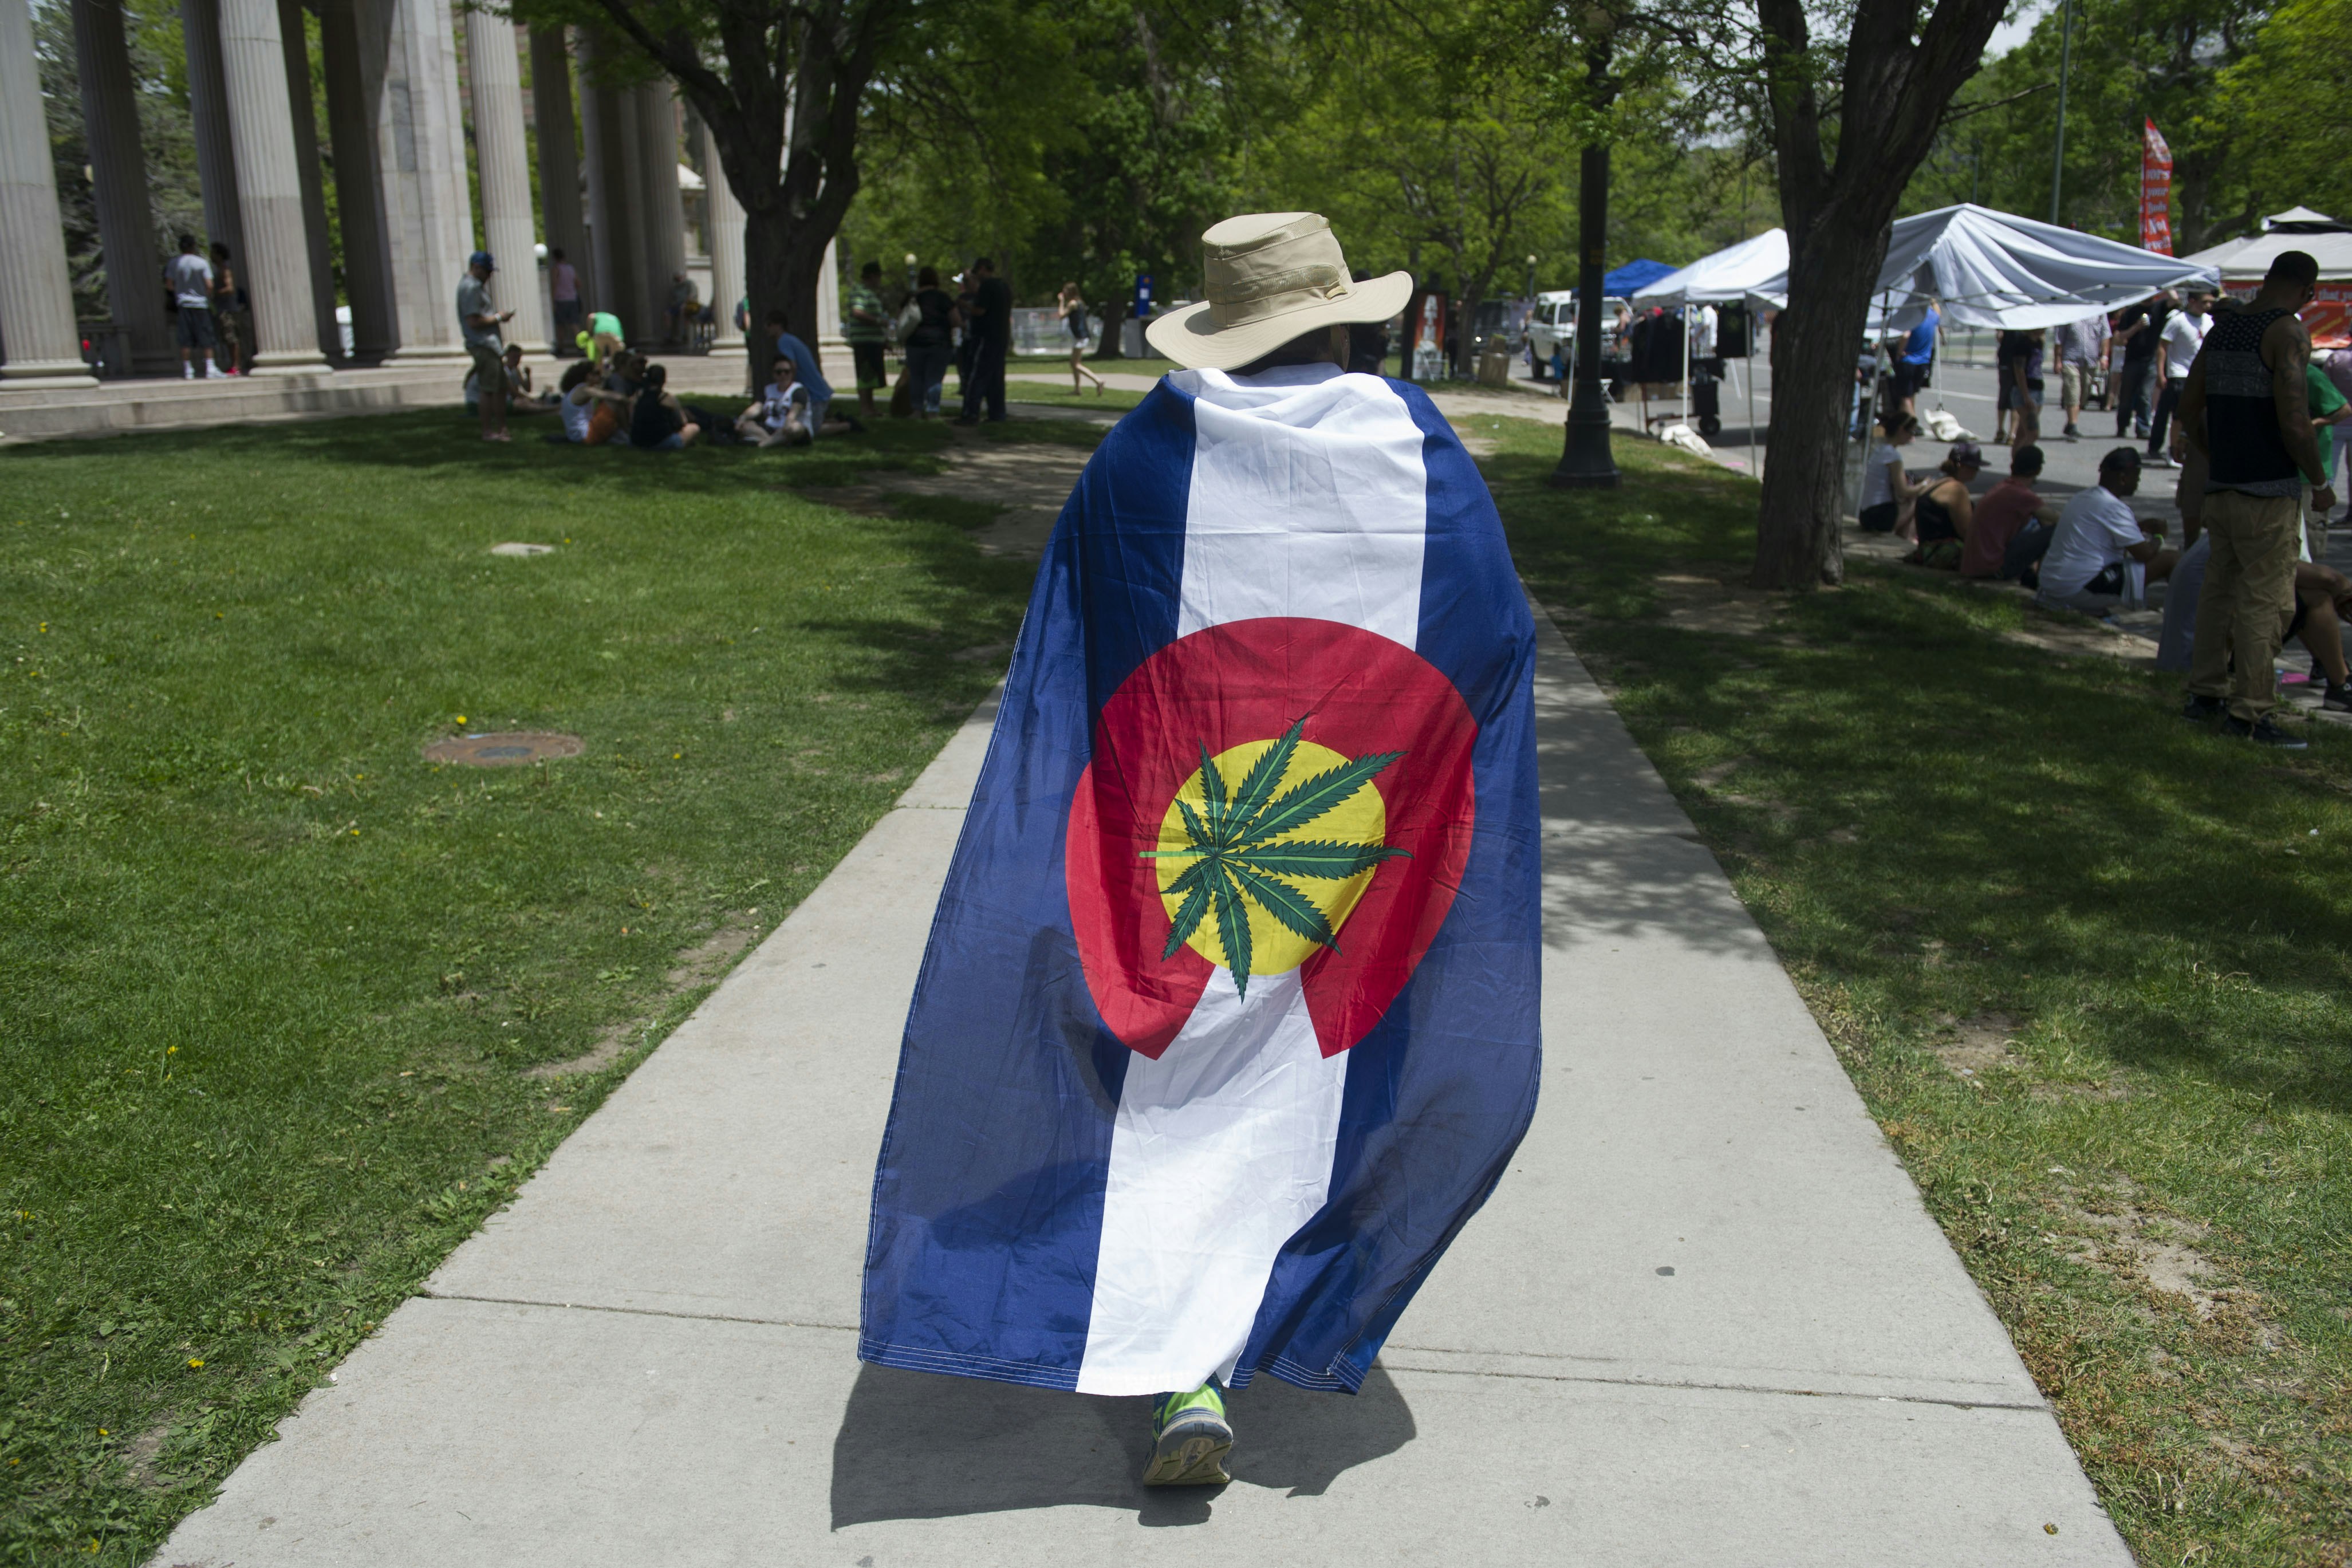 A man in a white bucket hat walks down the sidewalk wearing a Colorado state flag as a cape, where the yellow center of the flag is overlaid with a green cannabis leaf